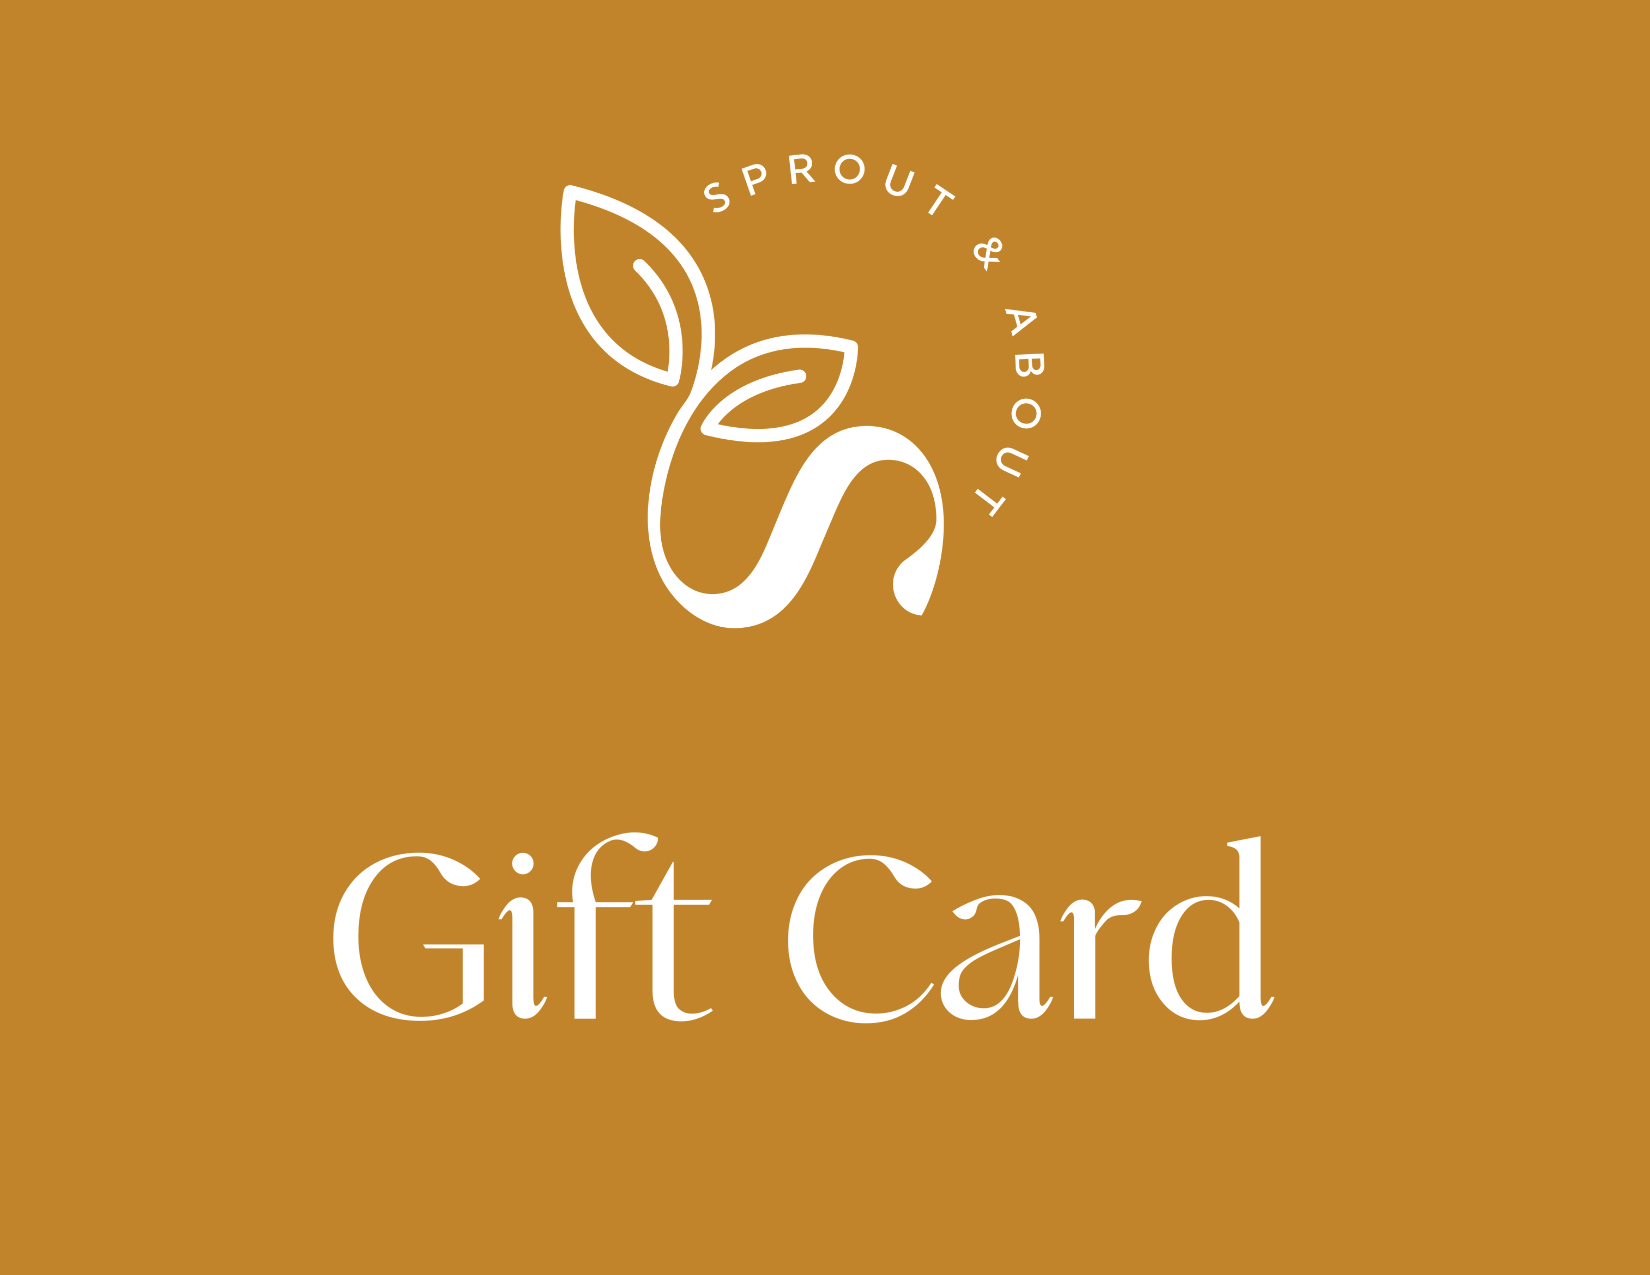 SPROUT & ABOUT Gift Card